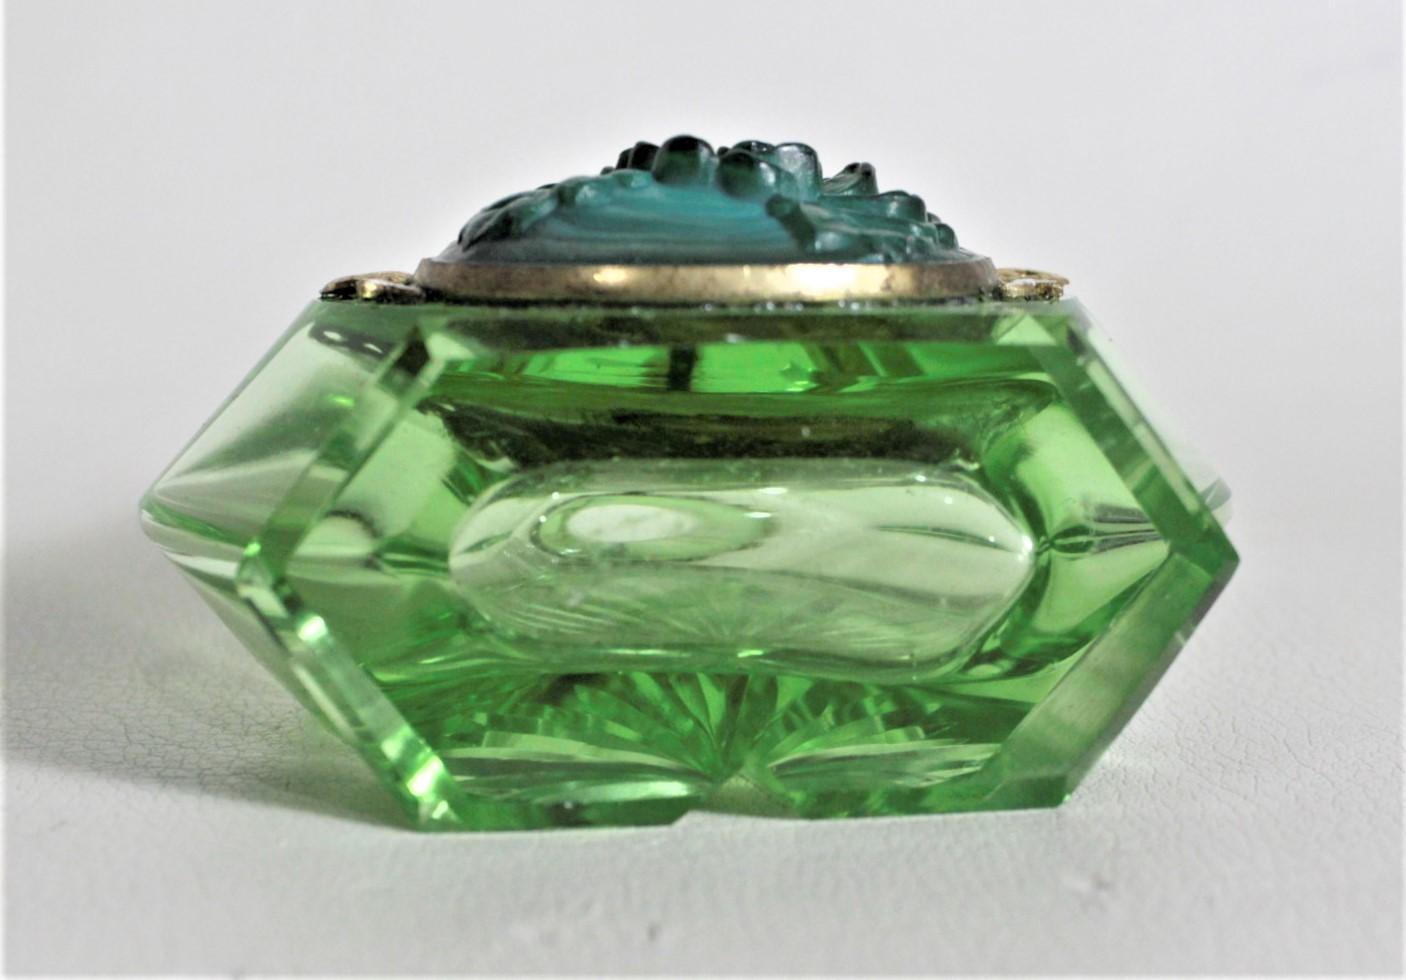 20th Century Art Deco Czech Cut Crystal Perfume Bottle with Applied Filigree and Inlaid Glass